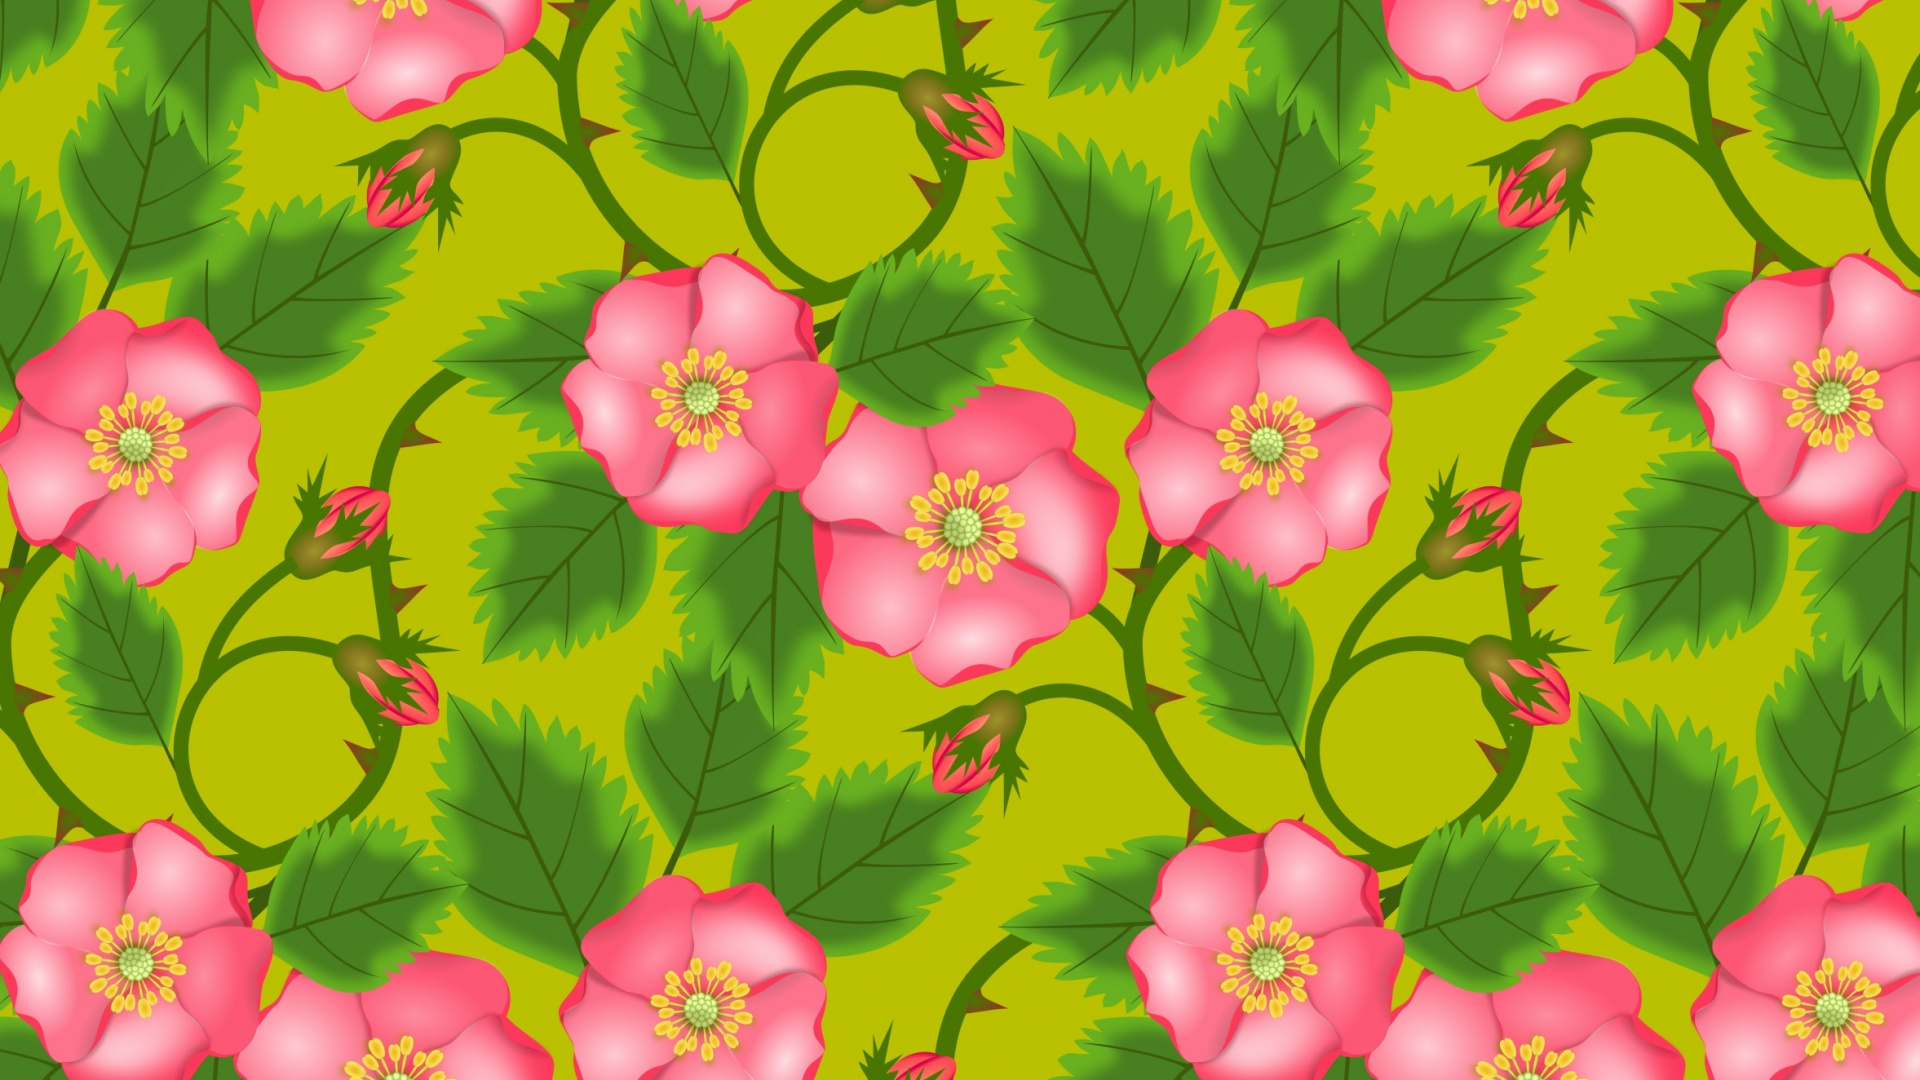 Pink and Red Flowers on Green Leaves. Wallpaper in 1920x1080 Resolution